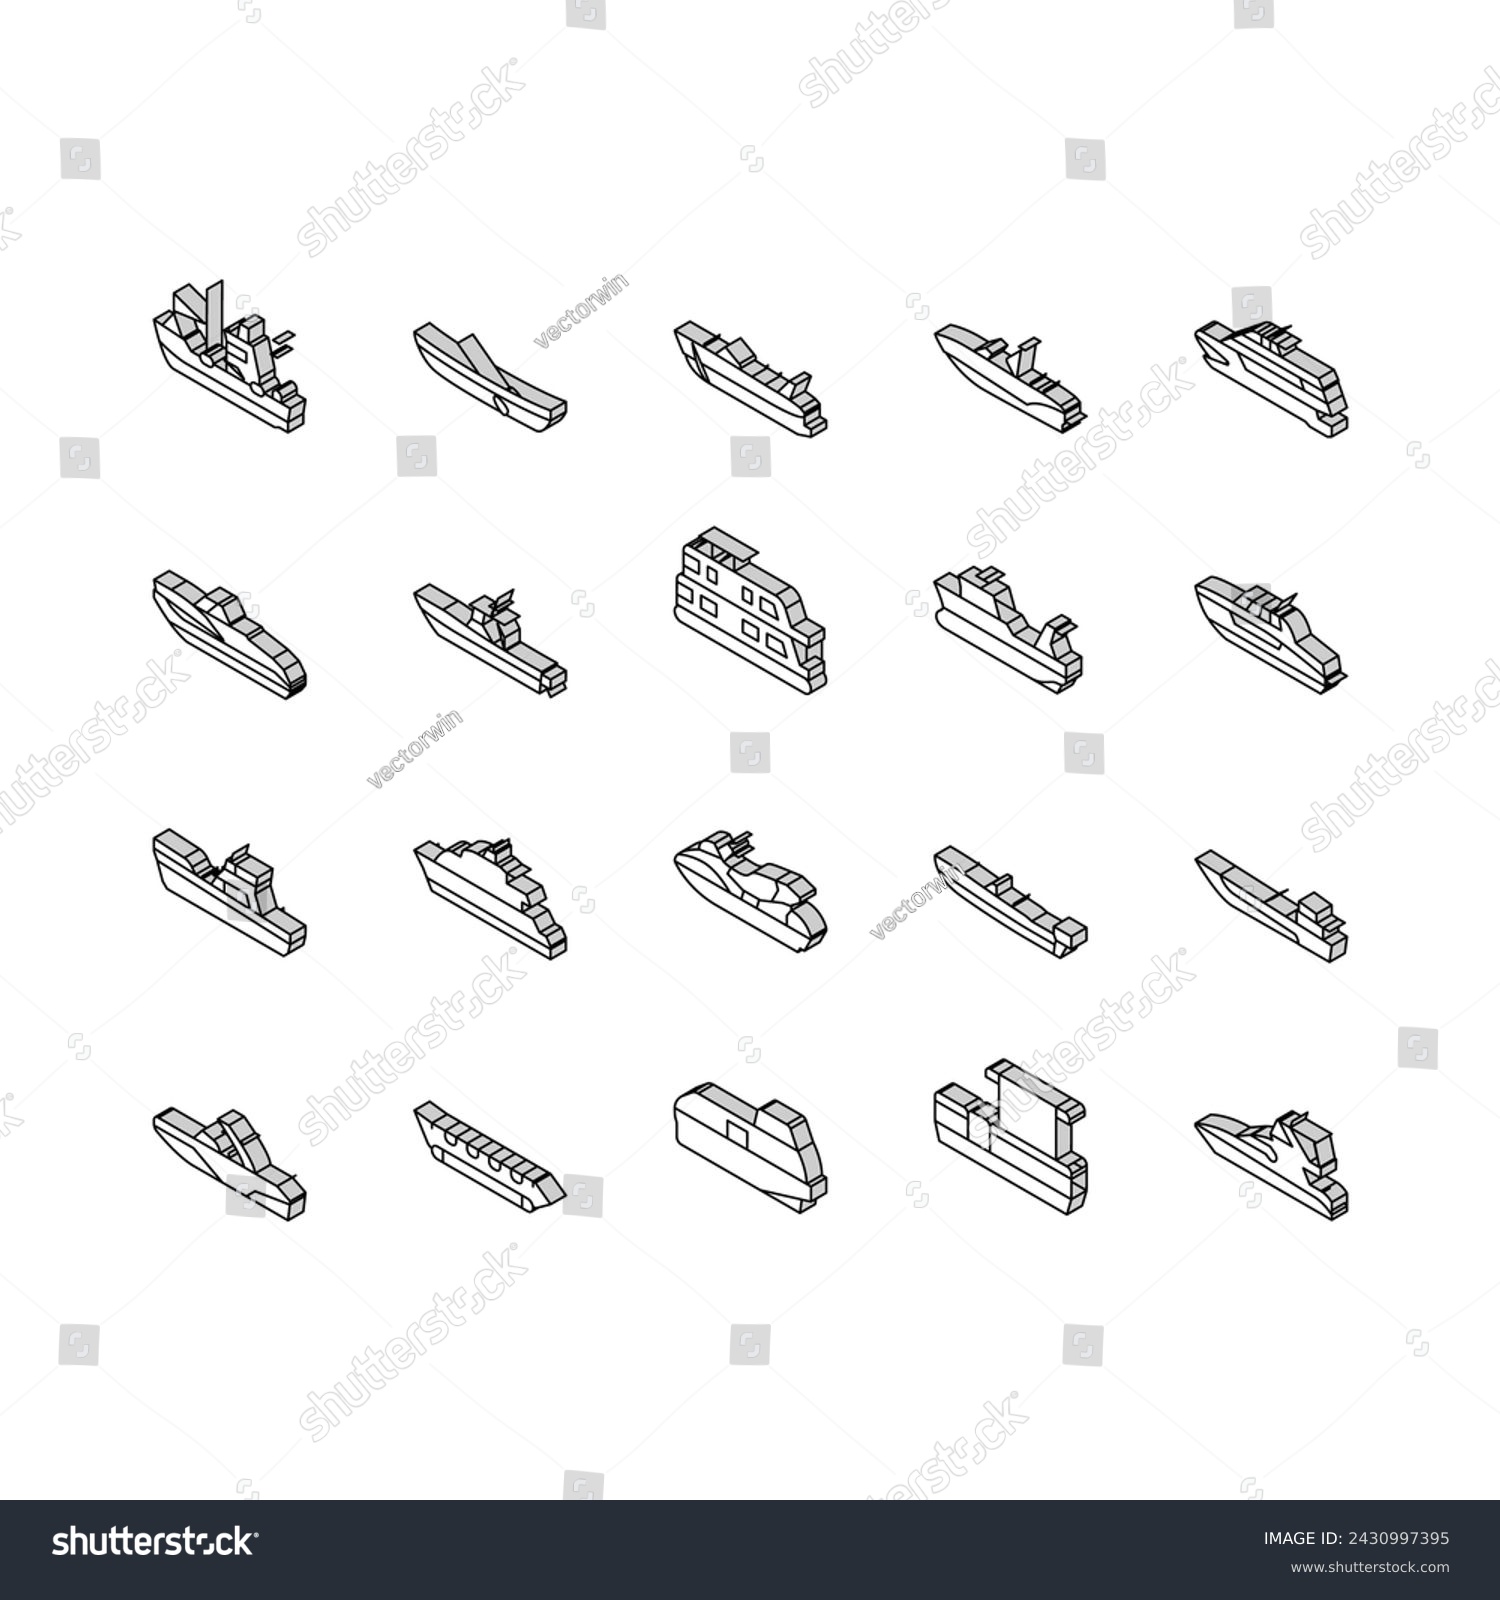 SVG of Boat Water Transportation Types isometric icons set. Runabout And Catamaran, Fishing And Bowrider, Motor Yacht And Cabin Cruiser Boat Line. Ship And Motorboat Transport Color . svg